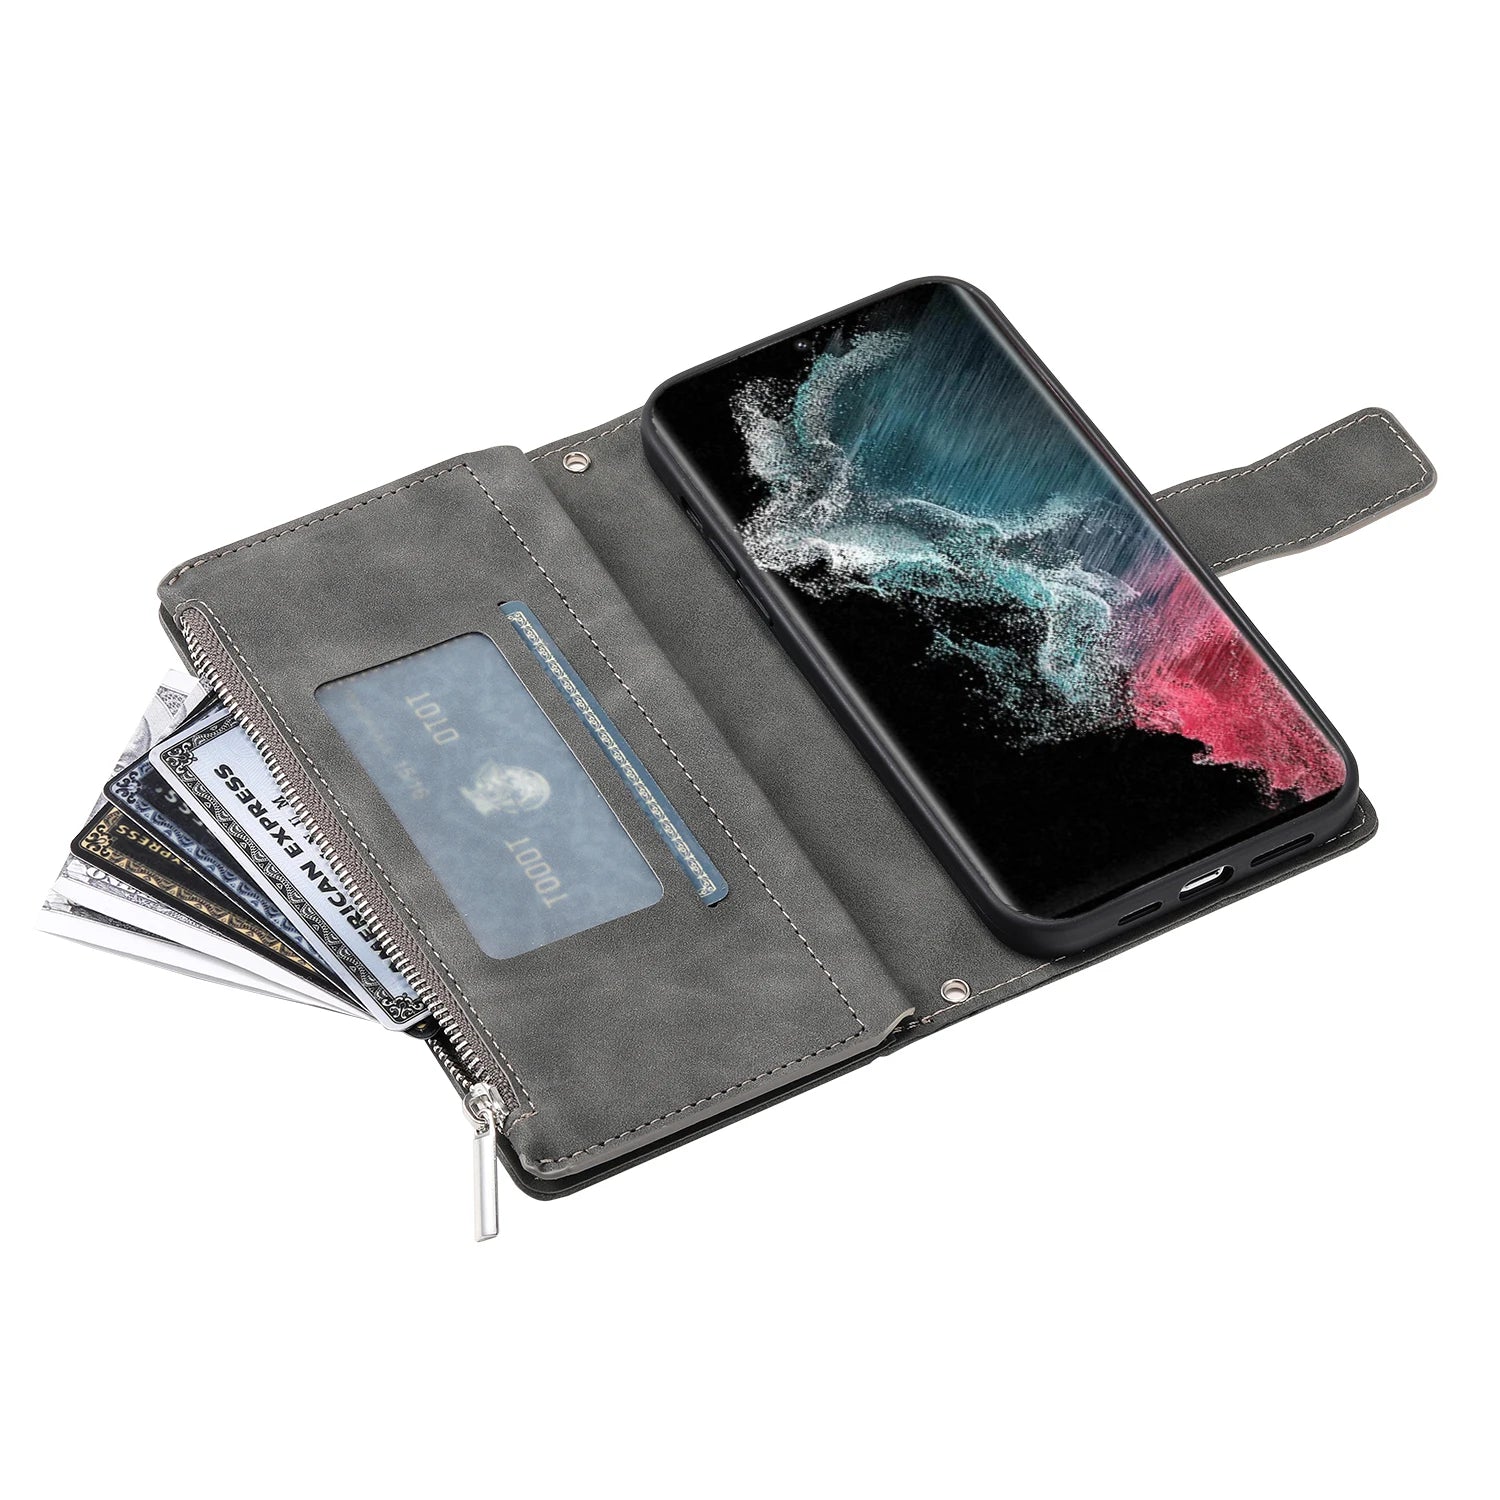 Embossing Card Wallet Leather Flip Galaxy A and S Case - DealJustDeal